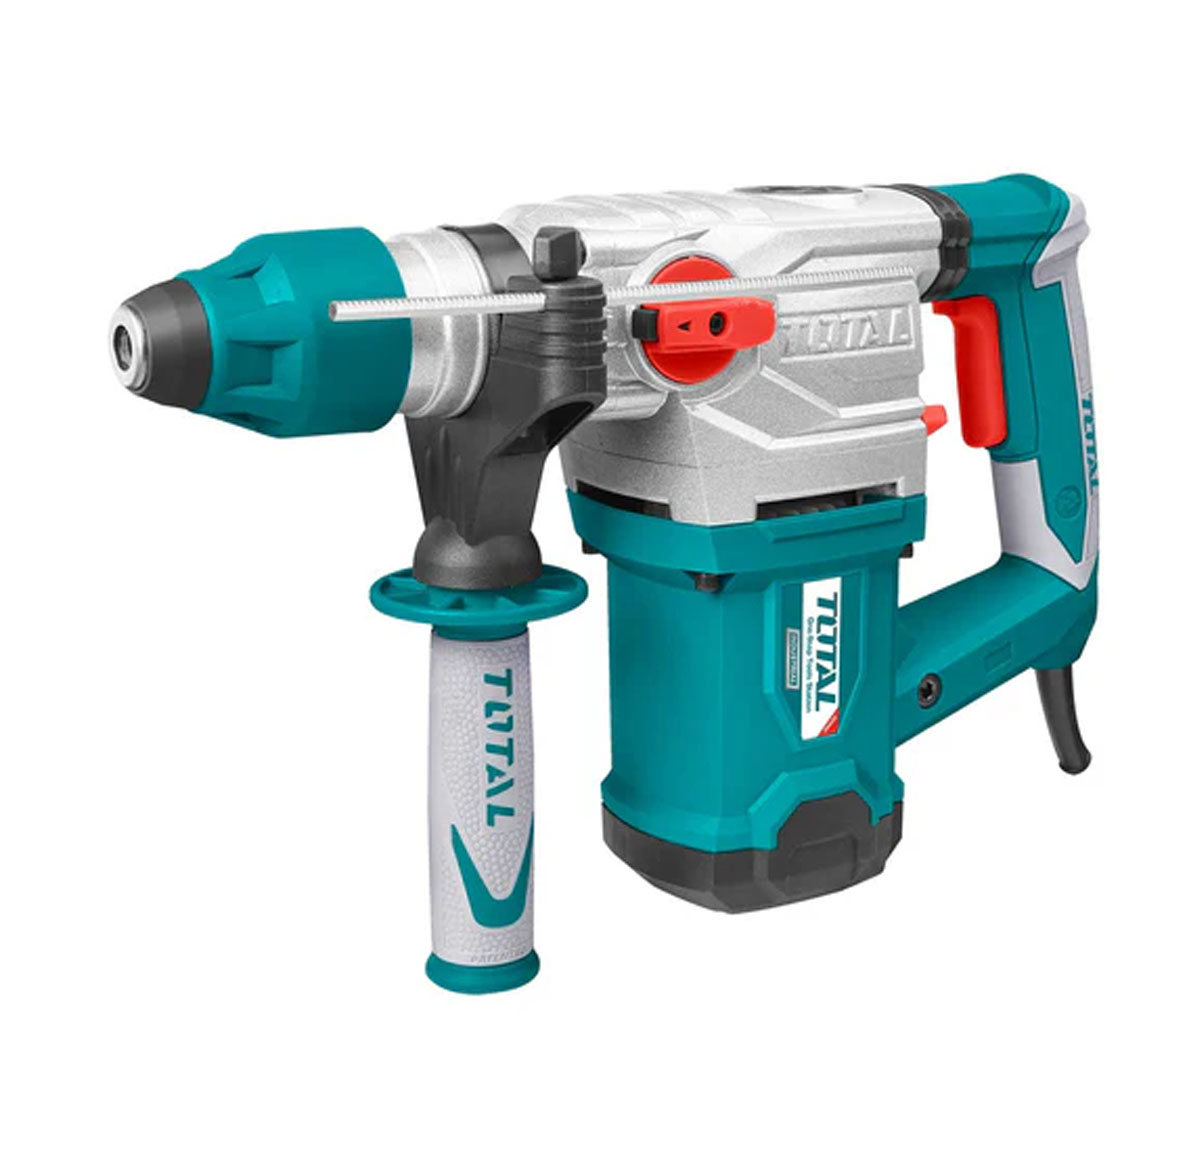 Total Rotary hammer 1500W 32mm TH115326